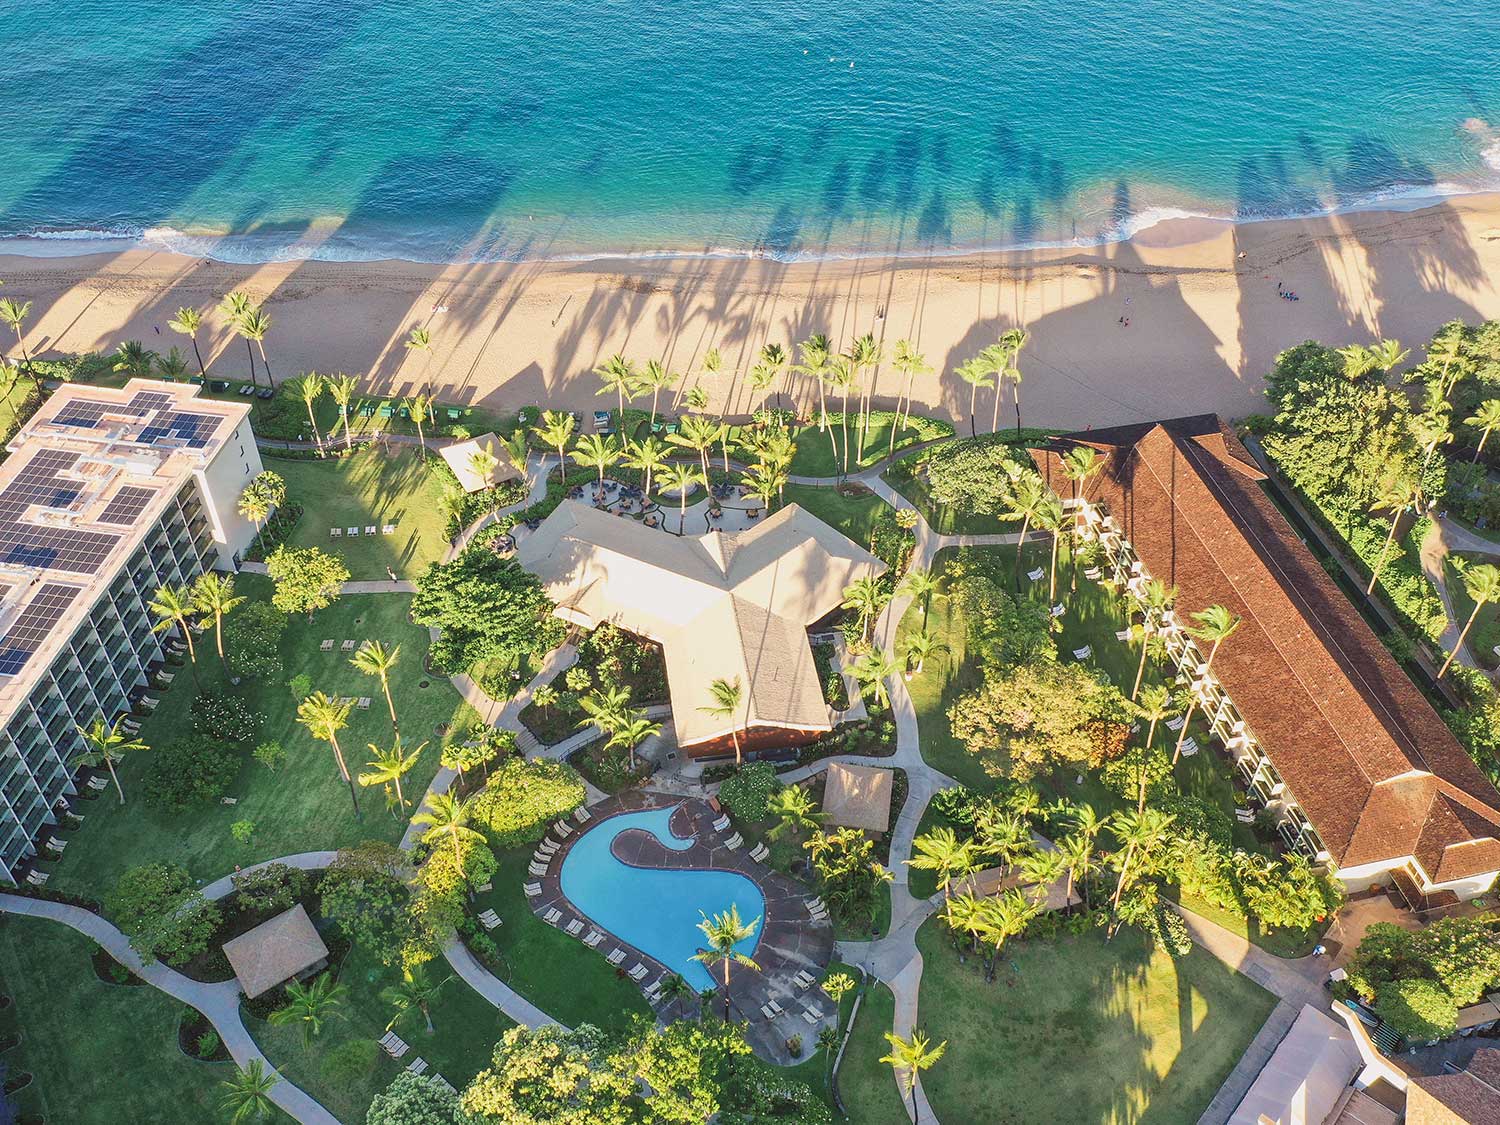 A drone's eye view of the Kā'anapali Beach Hotel on the island of Maui in Hawaii.